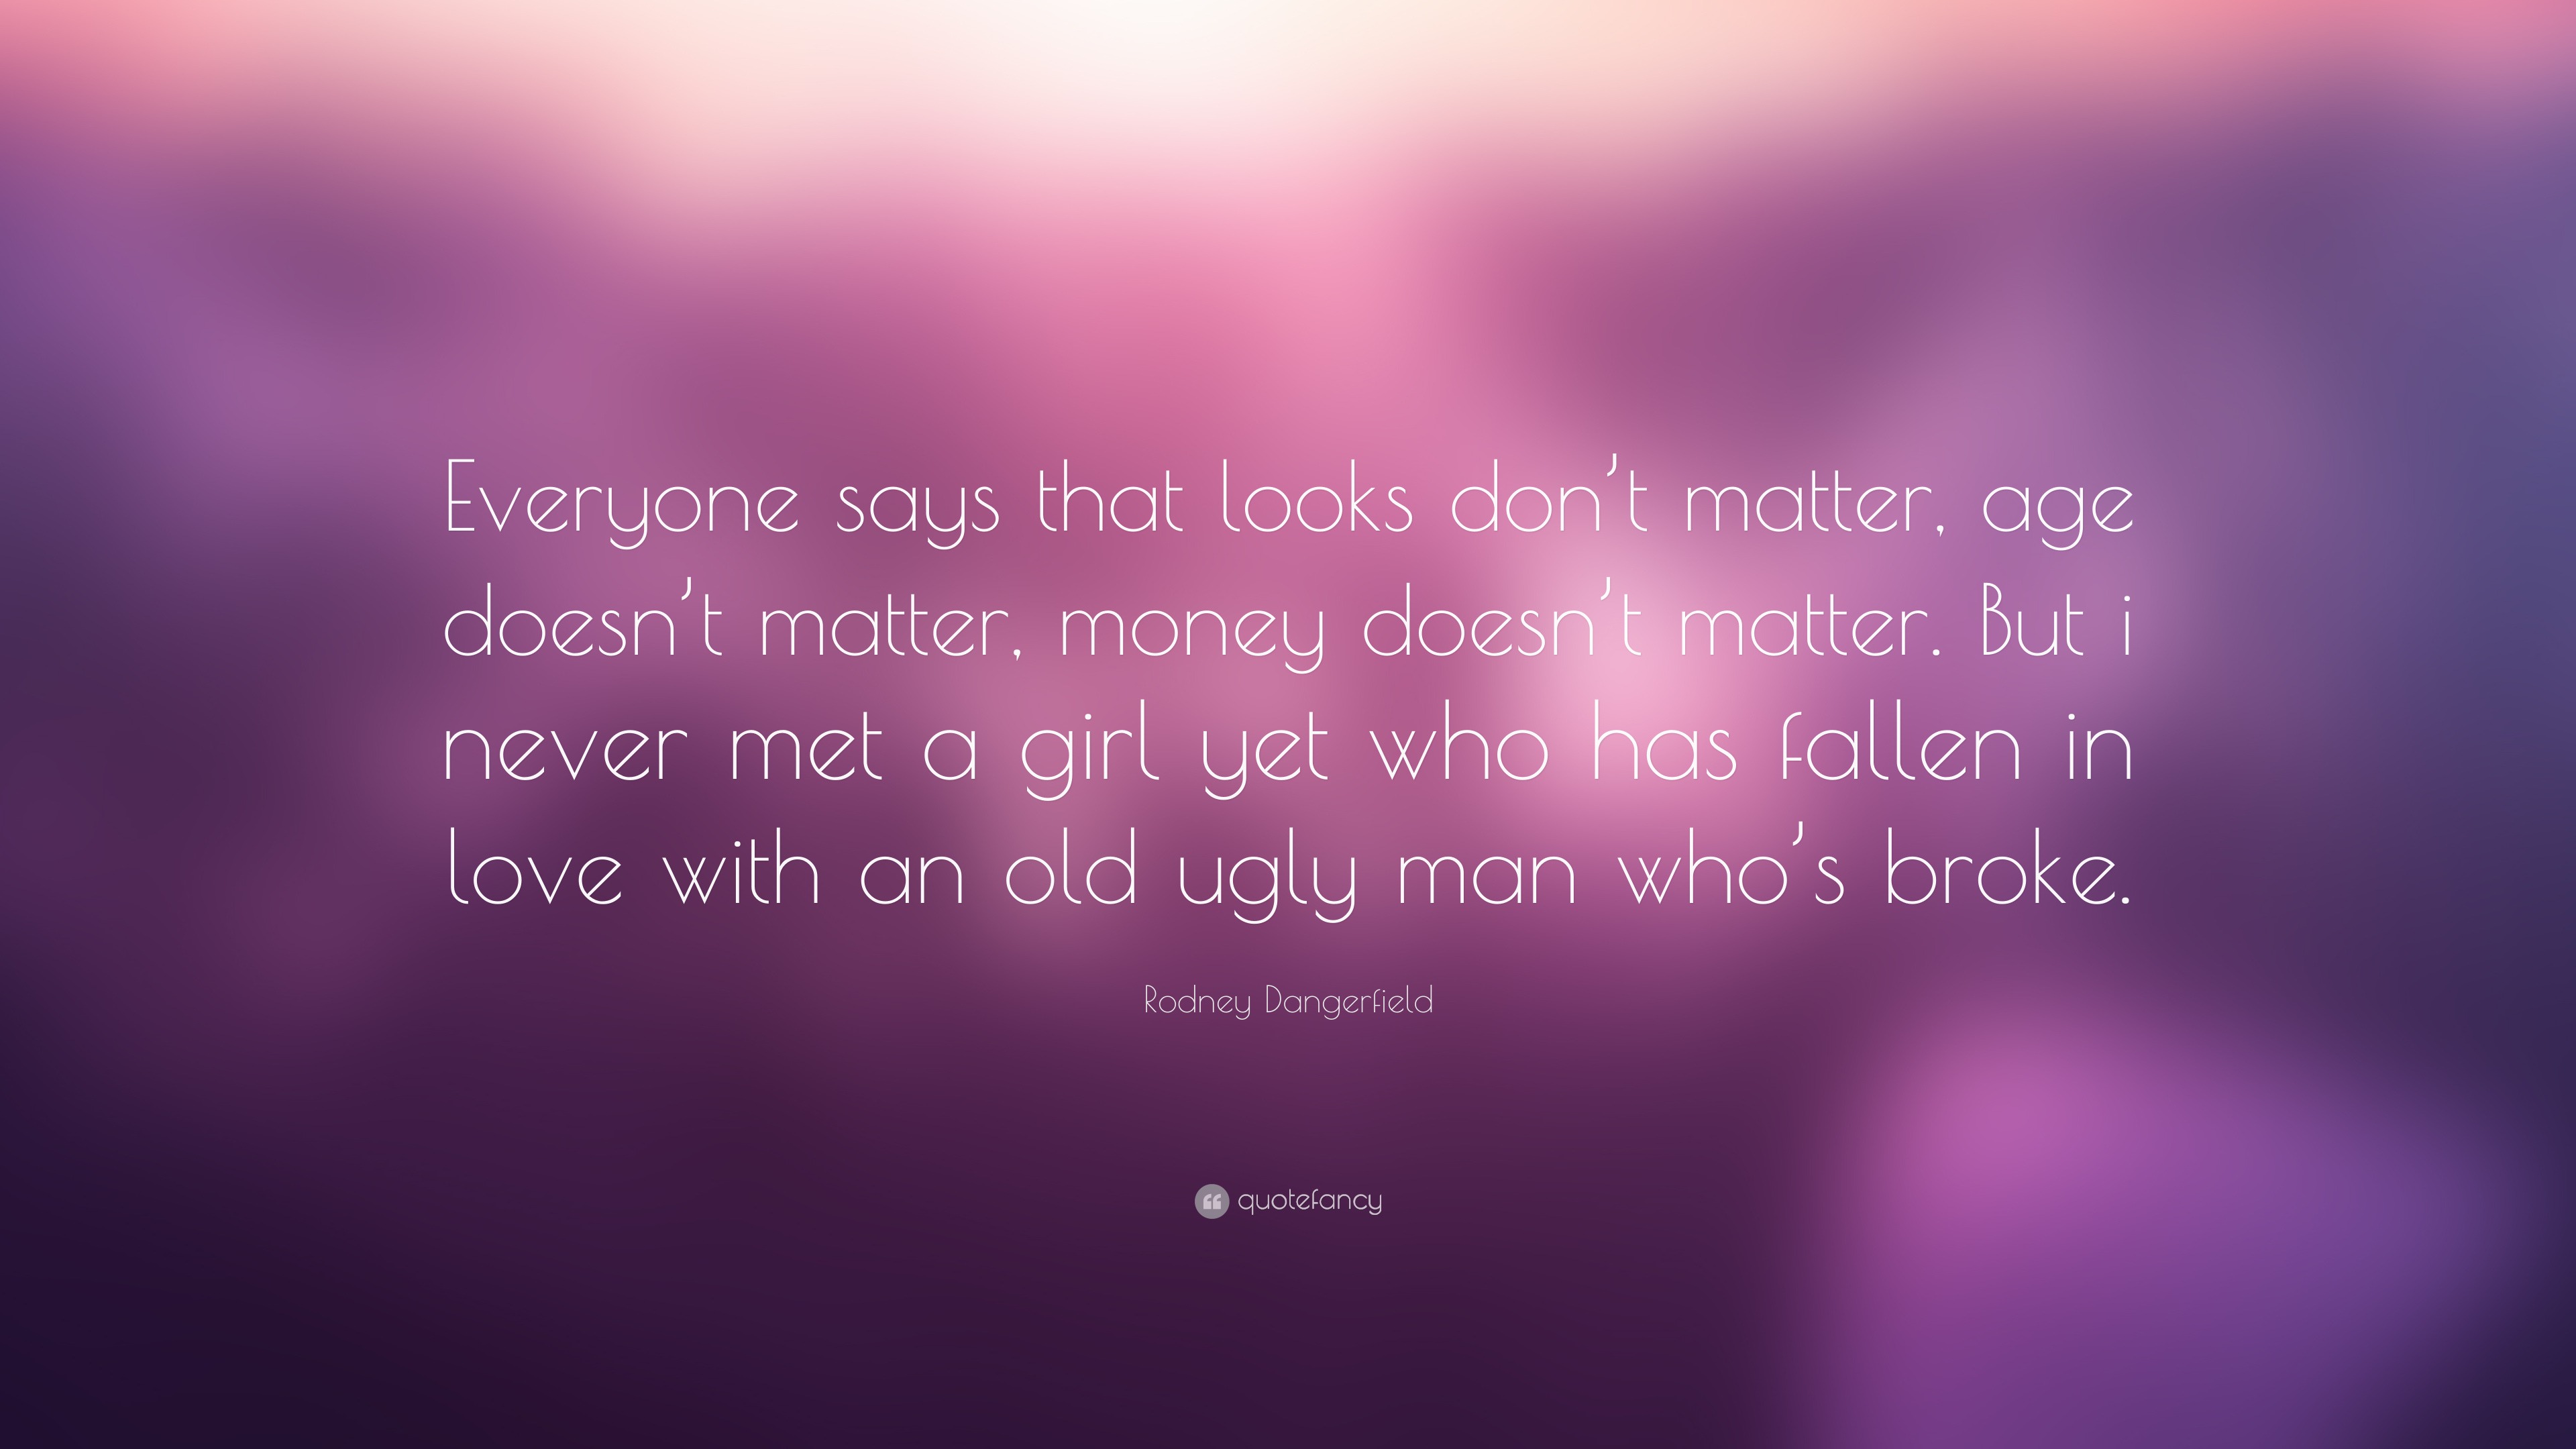 Rodney Dangerfield Quote: “Everyone says that looks don’t matter, age ...